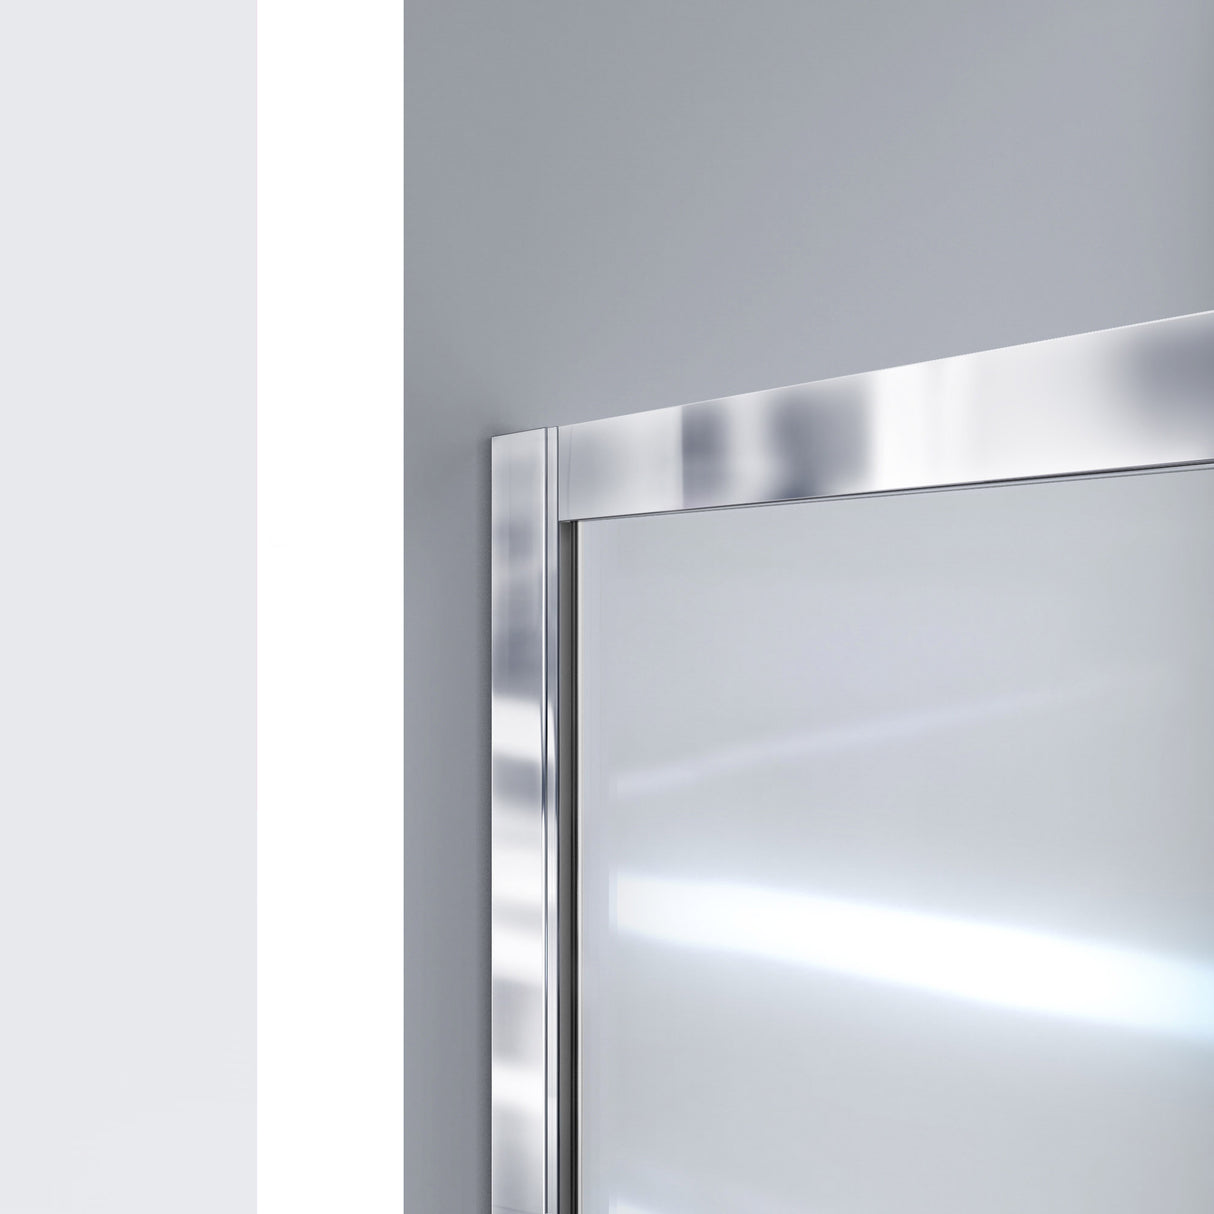 DreamLine Infinity-Z 34 in. D x 60 in. W x 78 3/4 in. H Sliding Shower Door, Base, and White Wall Kit in Chrome and Clear Glass